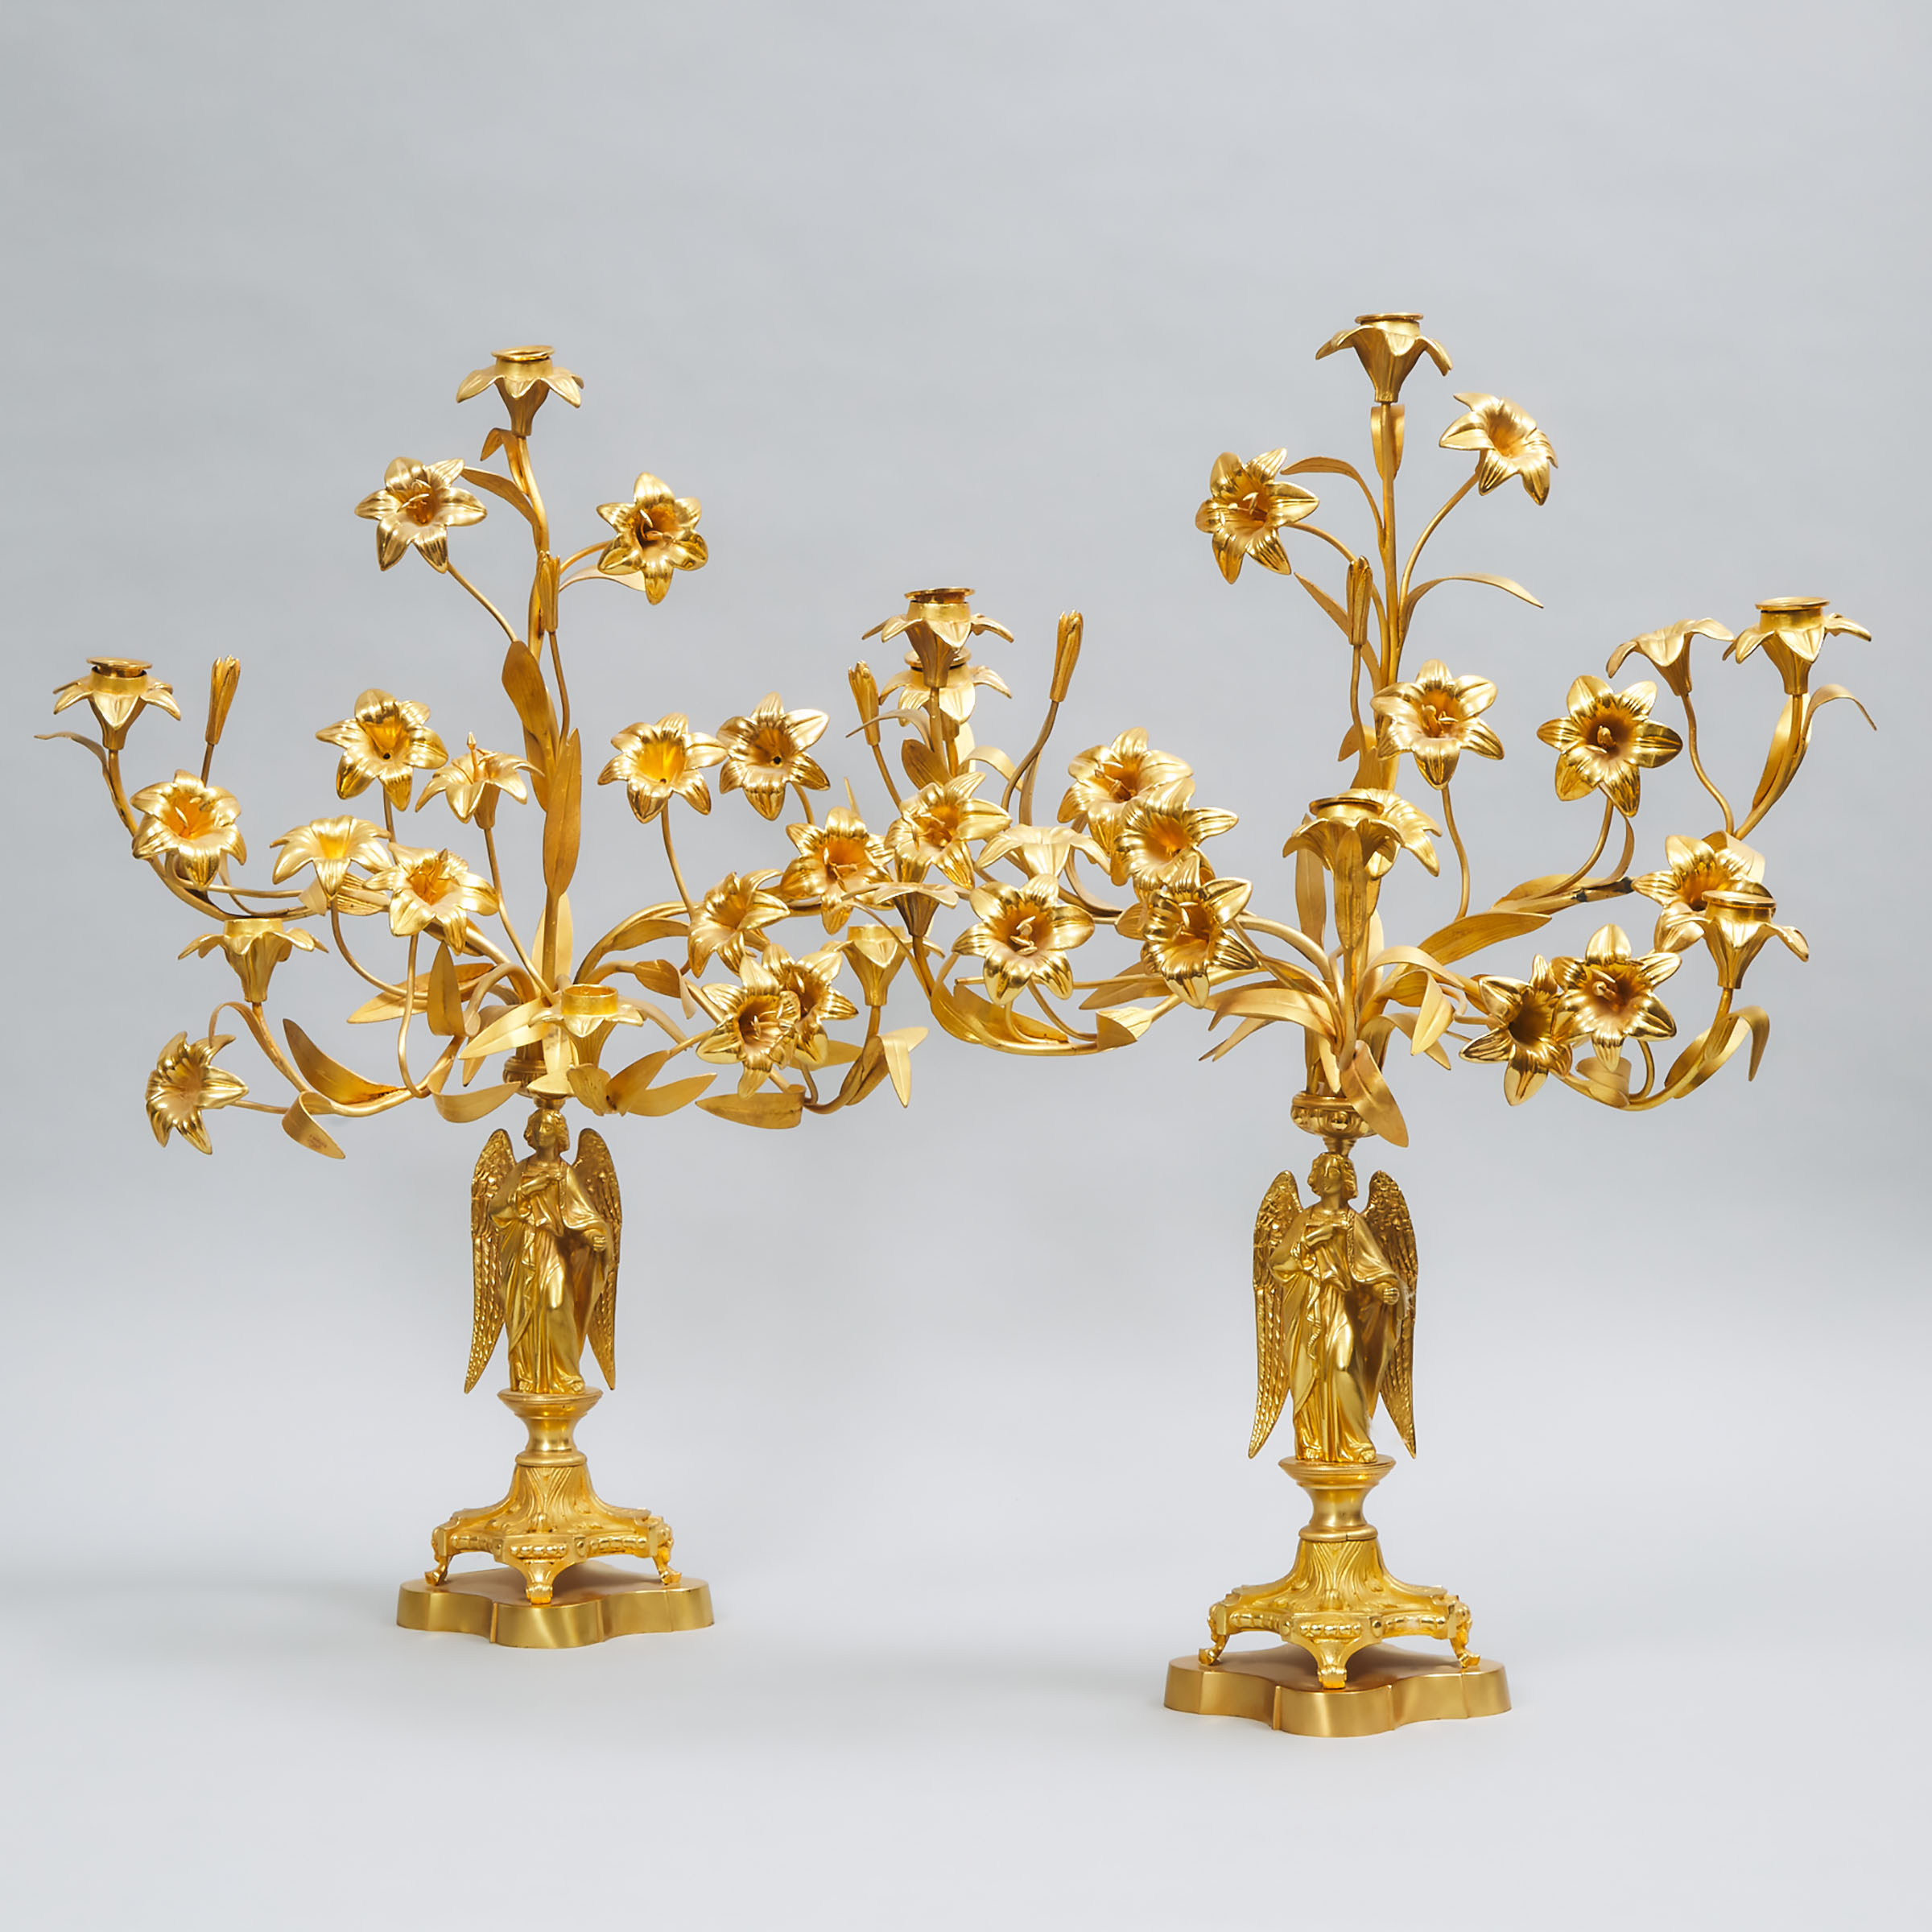 Pair of French Neo Gothic Gilt Bronze Figural Candelabra, mid 20th century